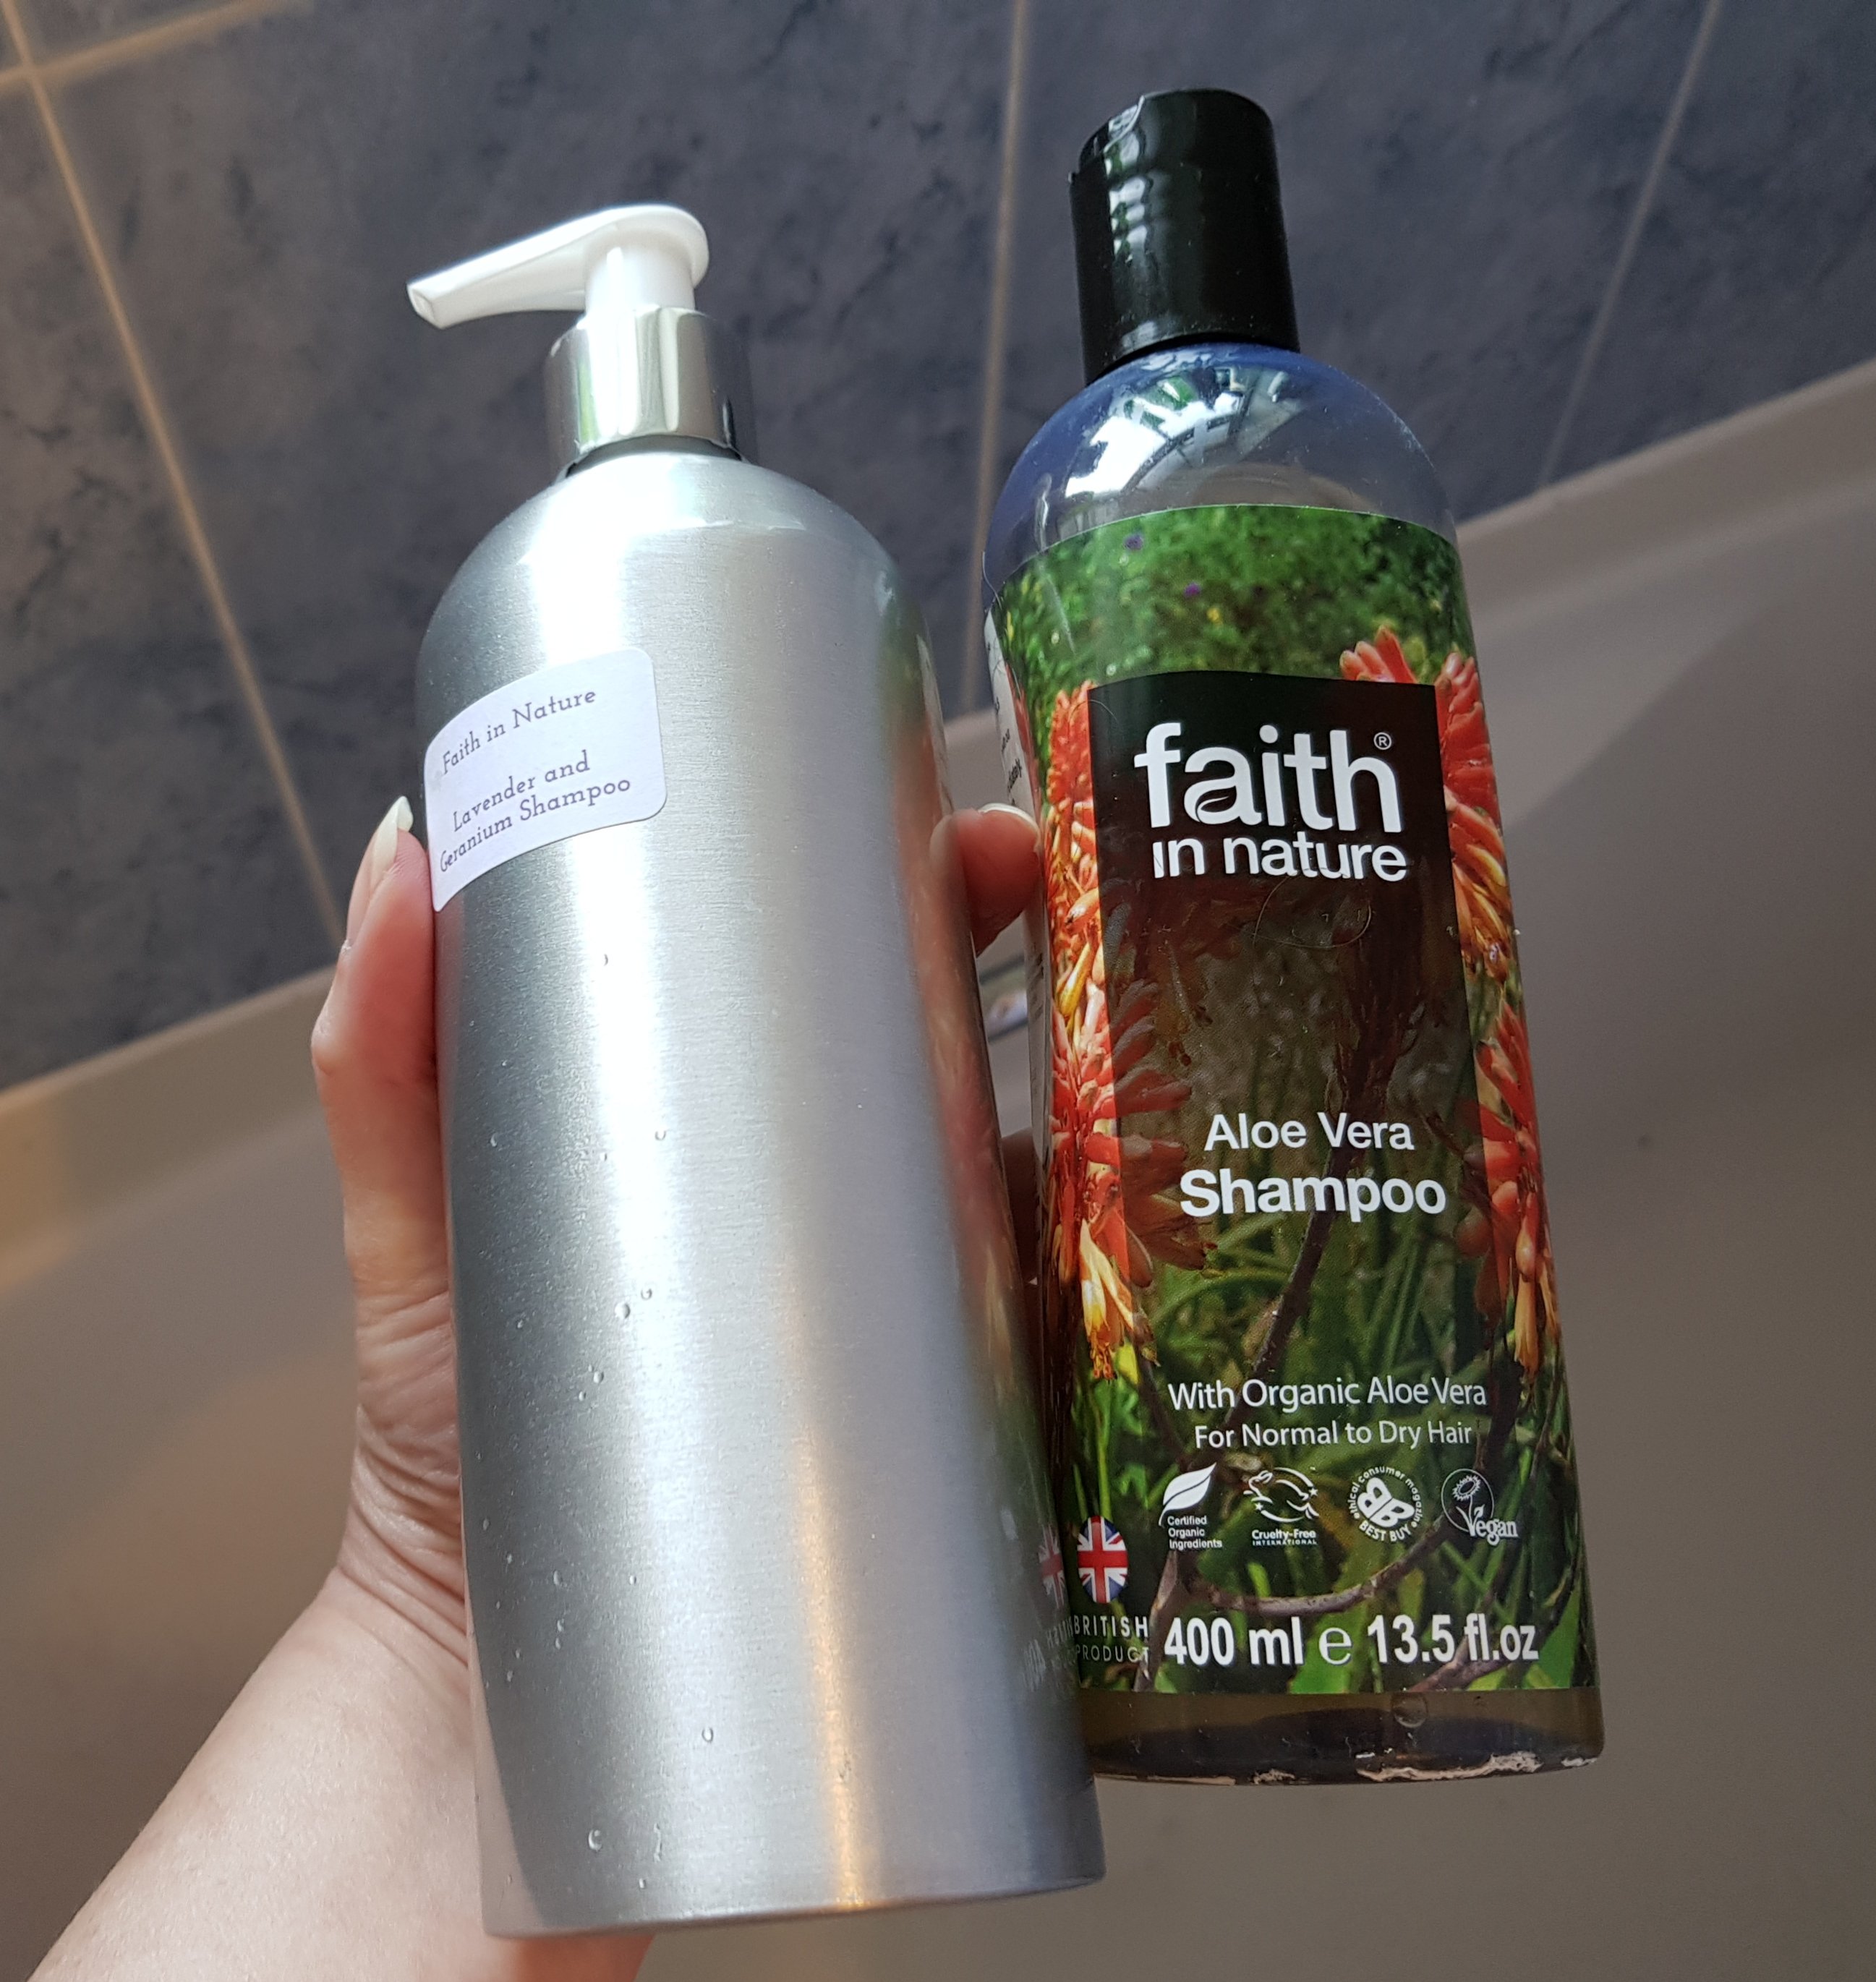 Plastic bottle of shampoo switched for zero waste refillable reusable dispenser